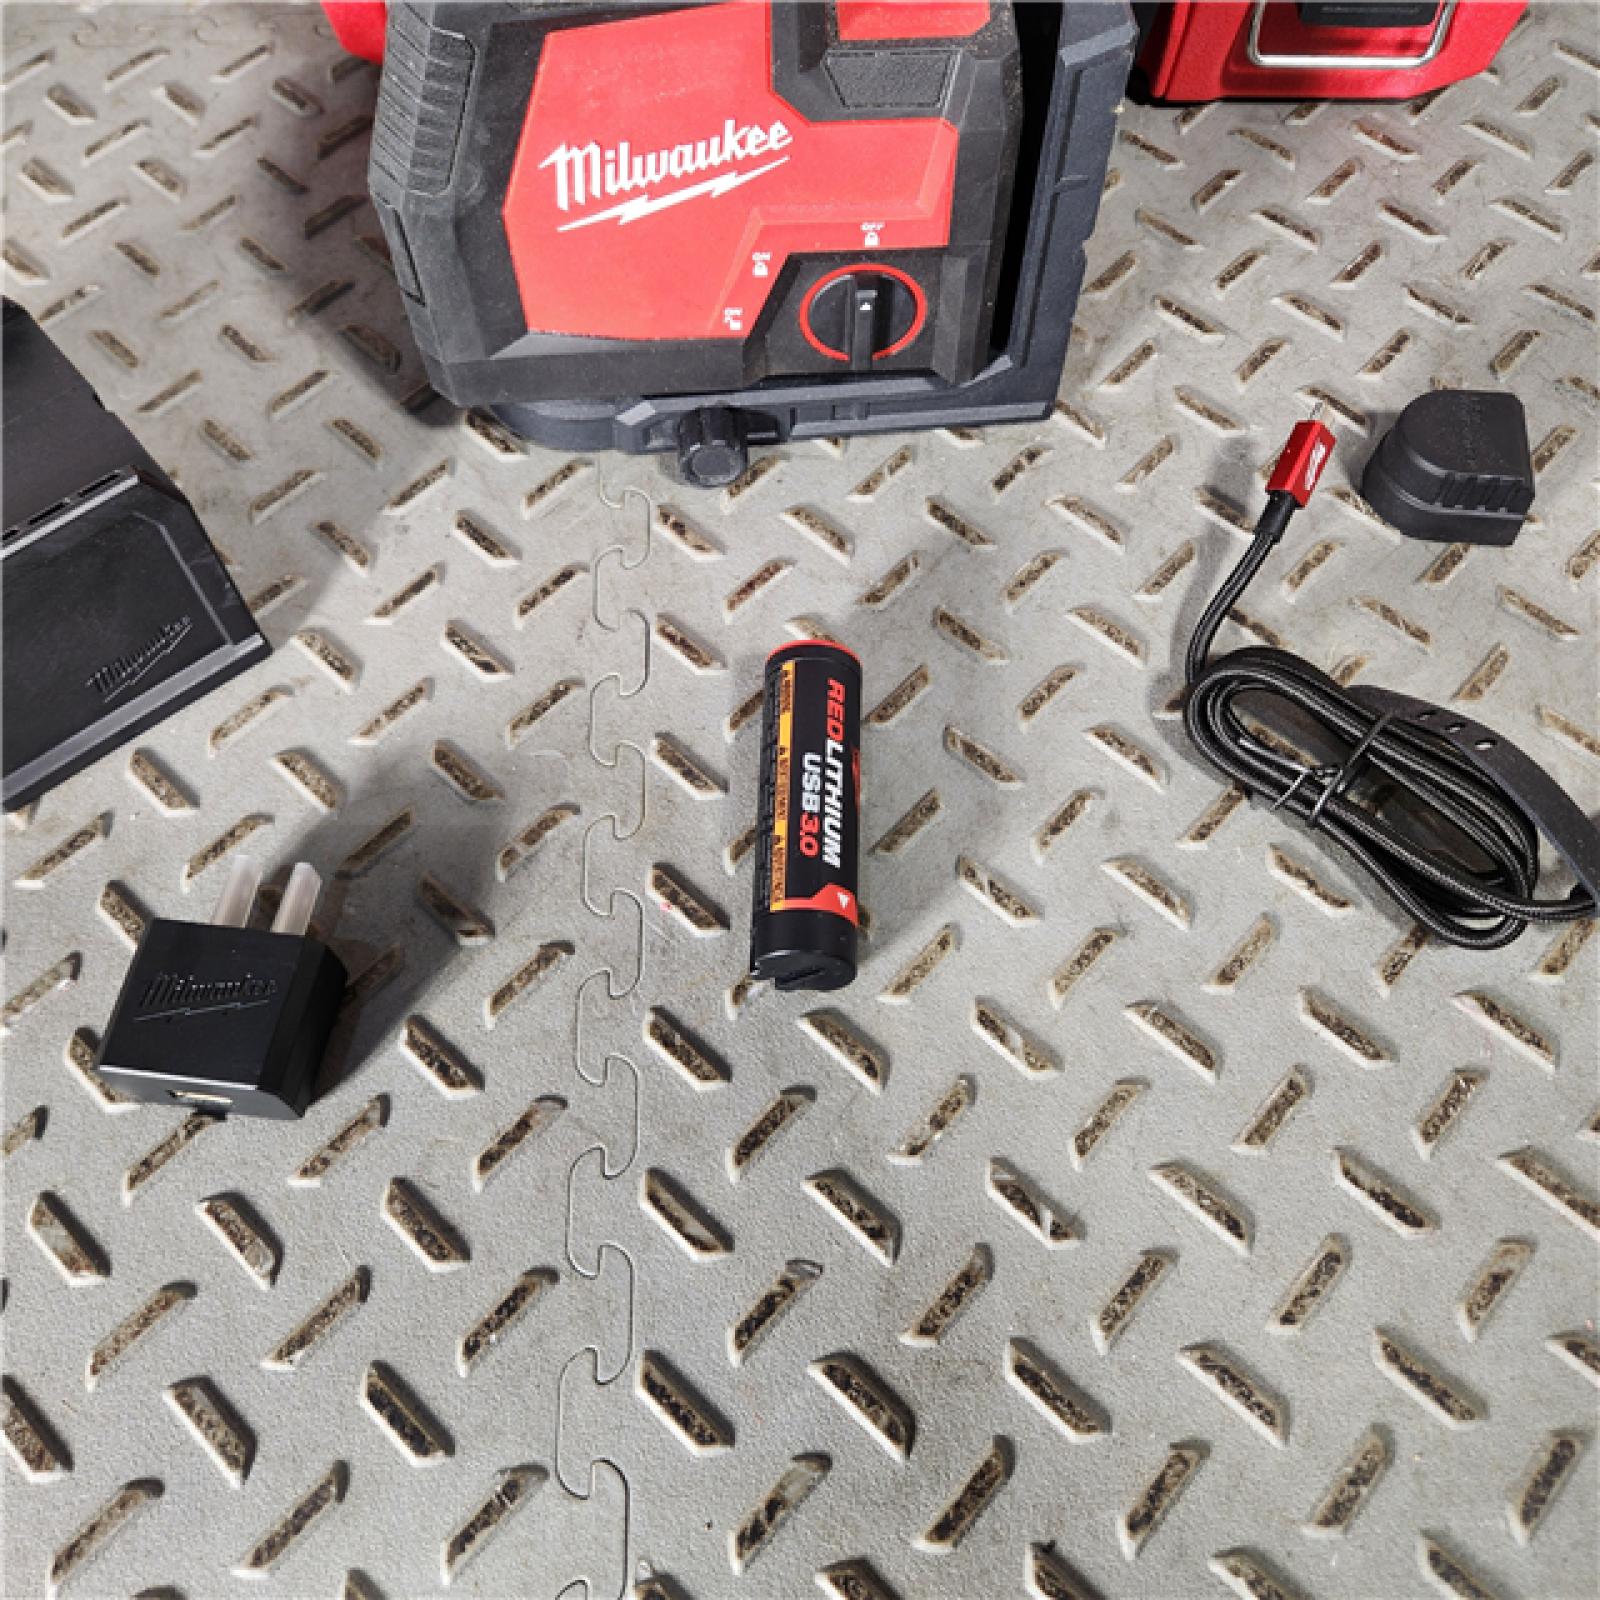 Houston Location - AS-IS Milwaukee 3522-21 4V Lithium-Ion Cordless USB Rechargeable Green Beam Cross-Line & Plumb Points Laser - Appears IN GOOD Condition